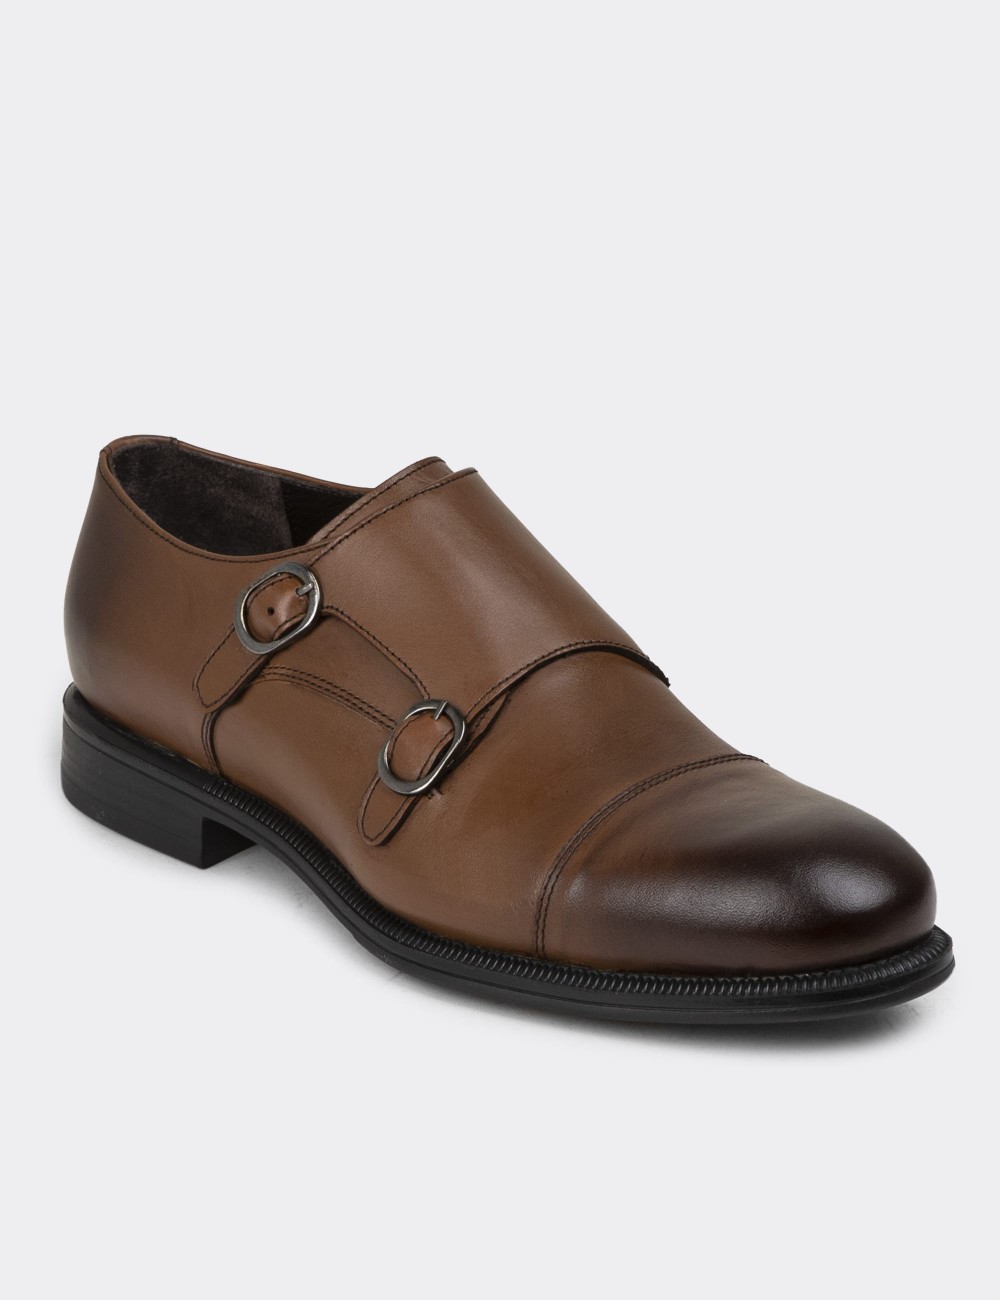 Tan Leather Double Monk-Strap Classic Shoes - 01838MTBAC01